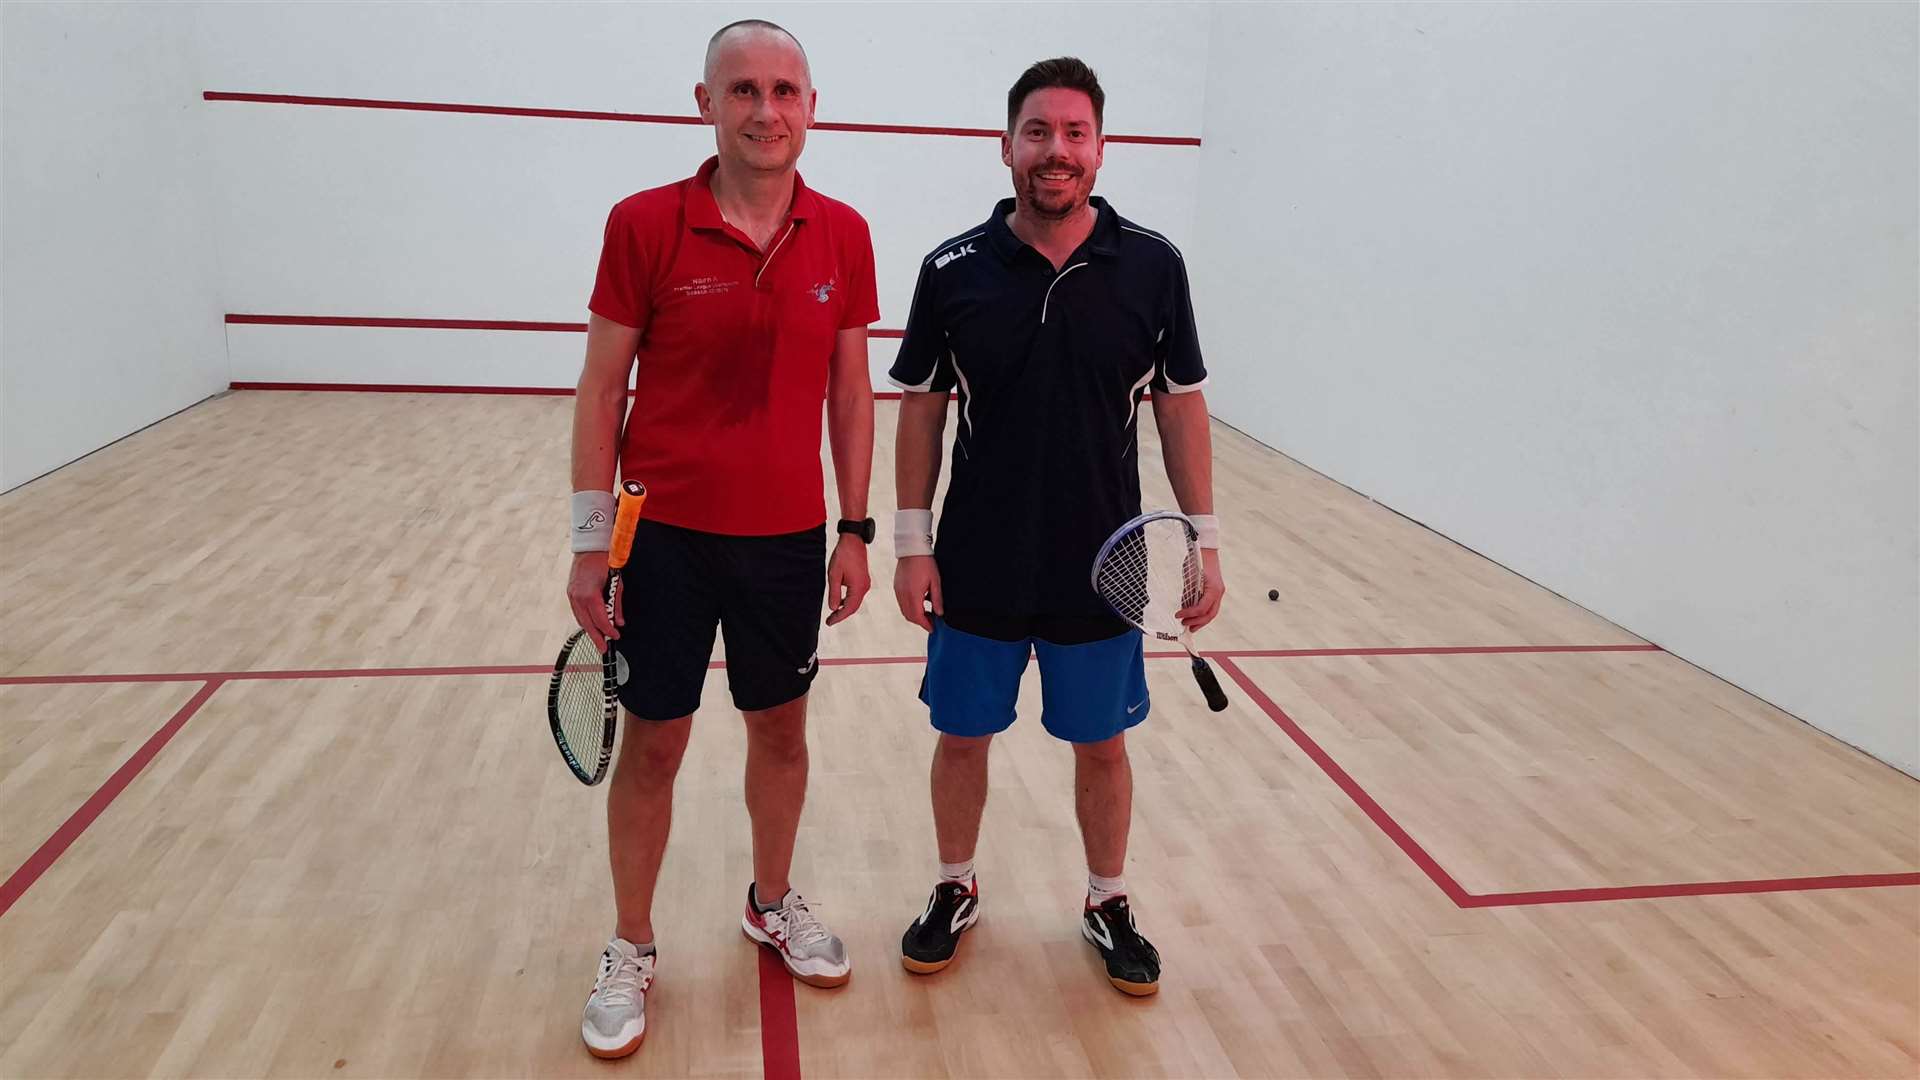 Graeme Spreng (right) after his win over John Kynoch.